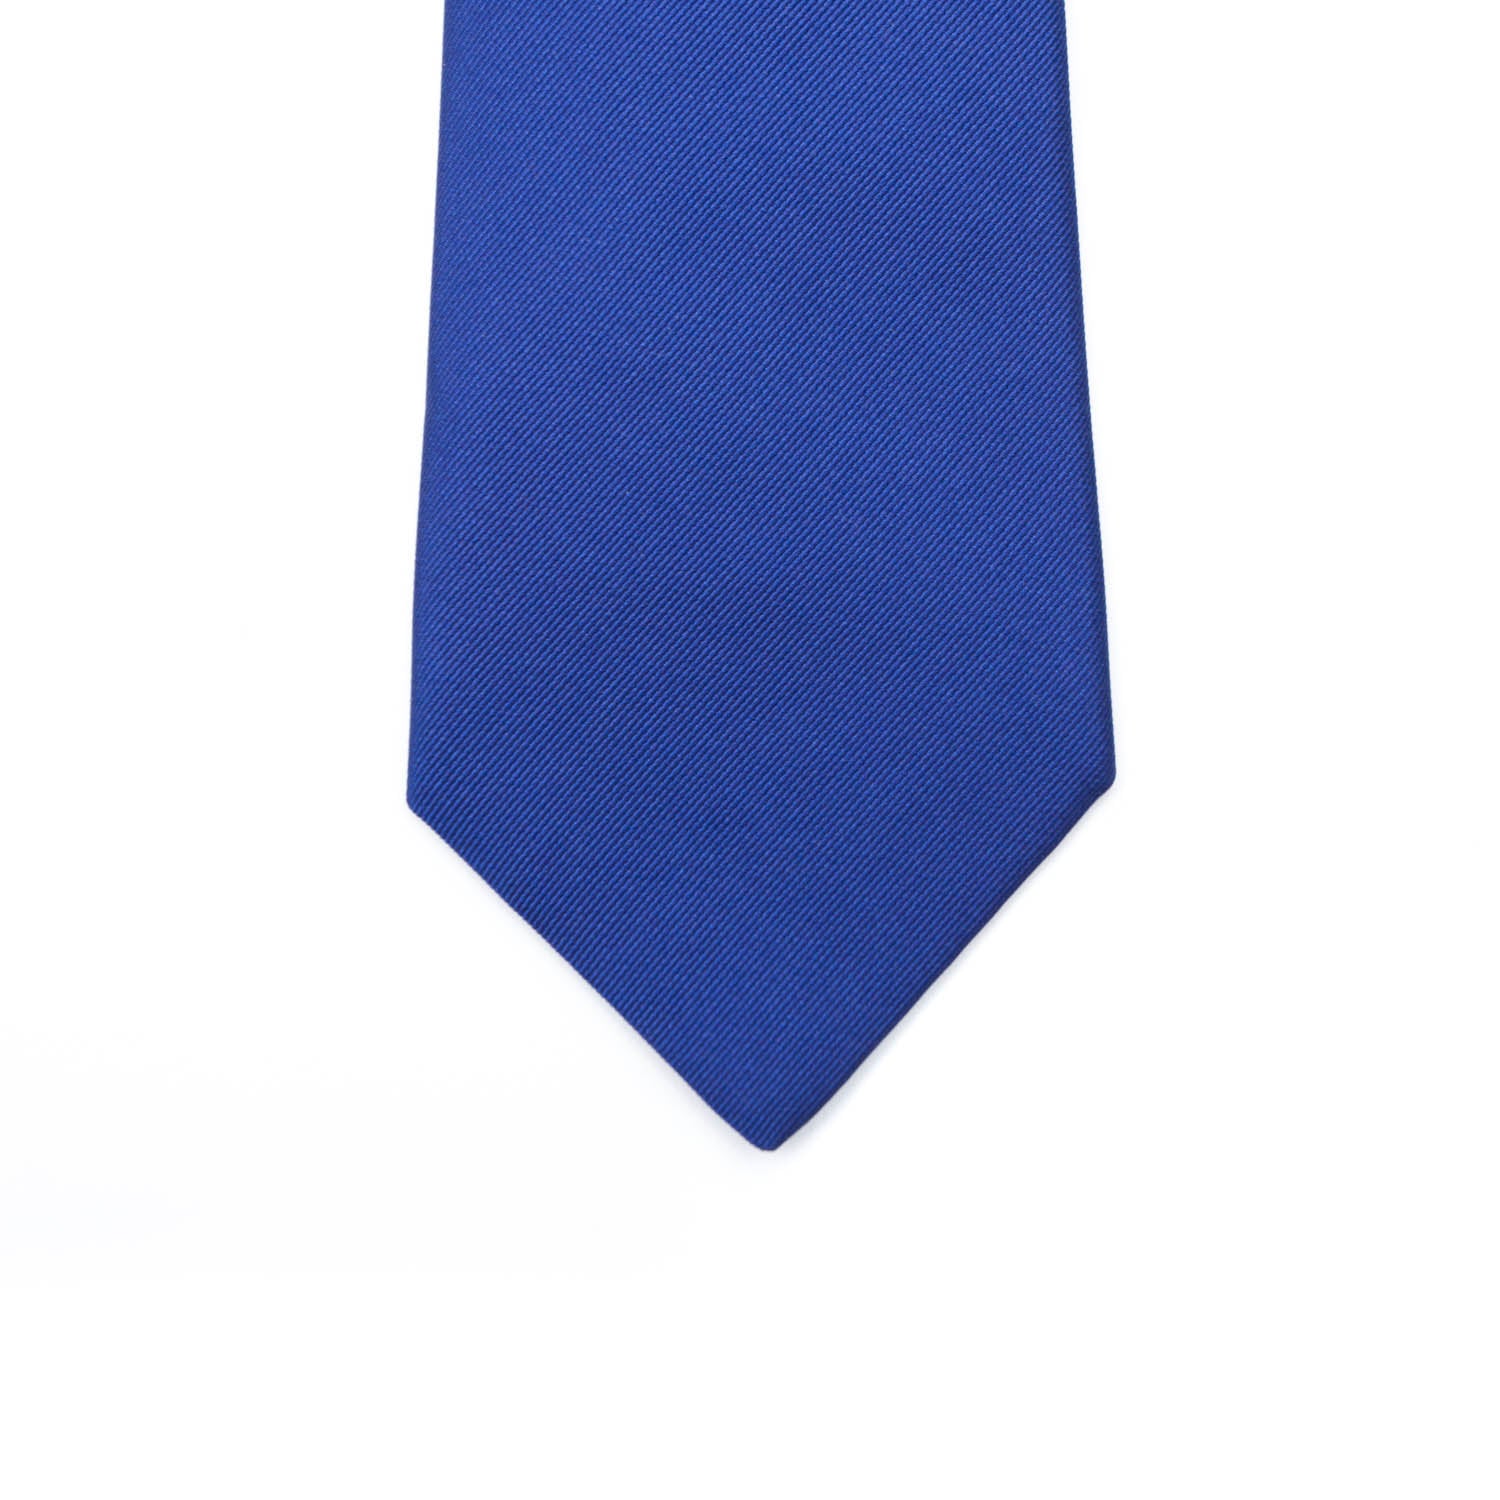 A KirbyAllison.com Sovereign Grade Blue Satin Tie on a white background with longevity.